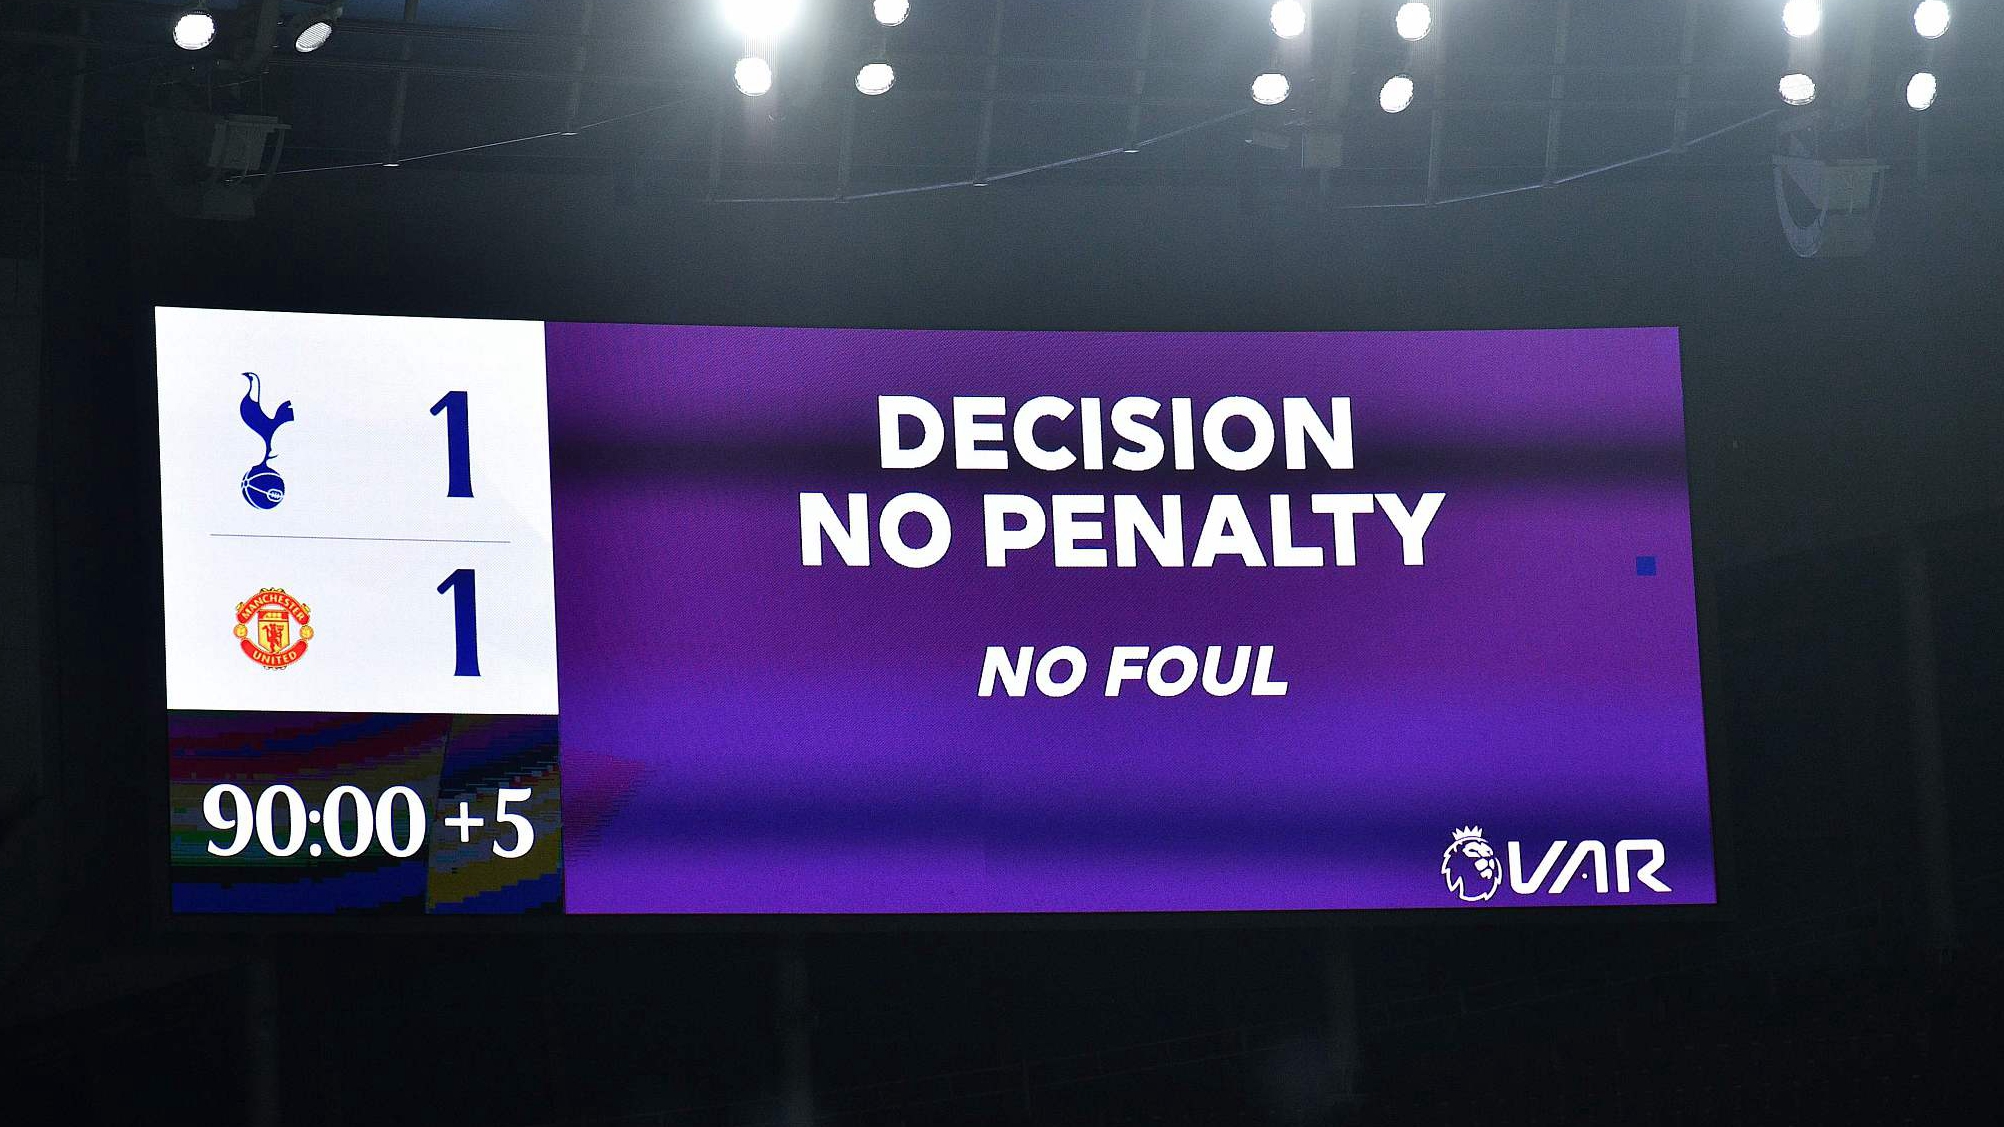 The scoreboard displays the decision by VAR that a potential penalty for Manchester United is disallowed during their clash with Tottenham Hotspur, in London, England, June 19, 2020. /CFP